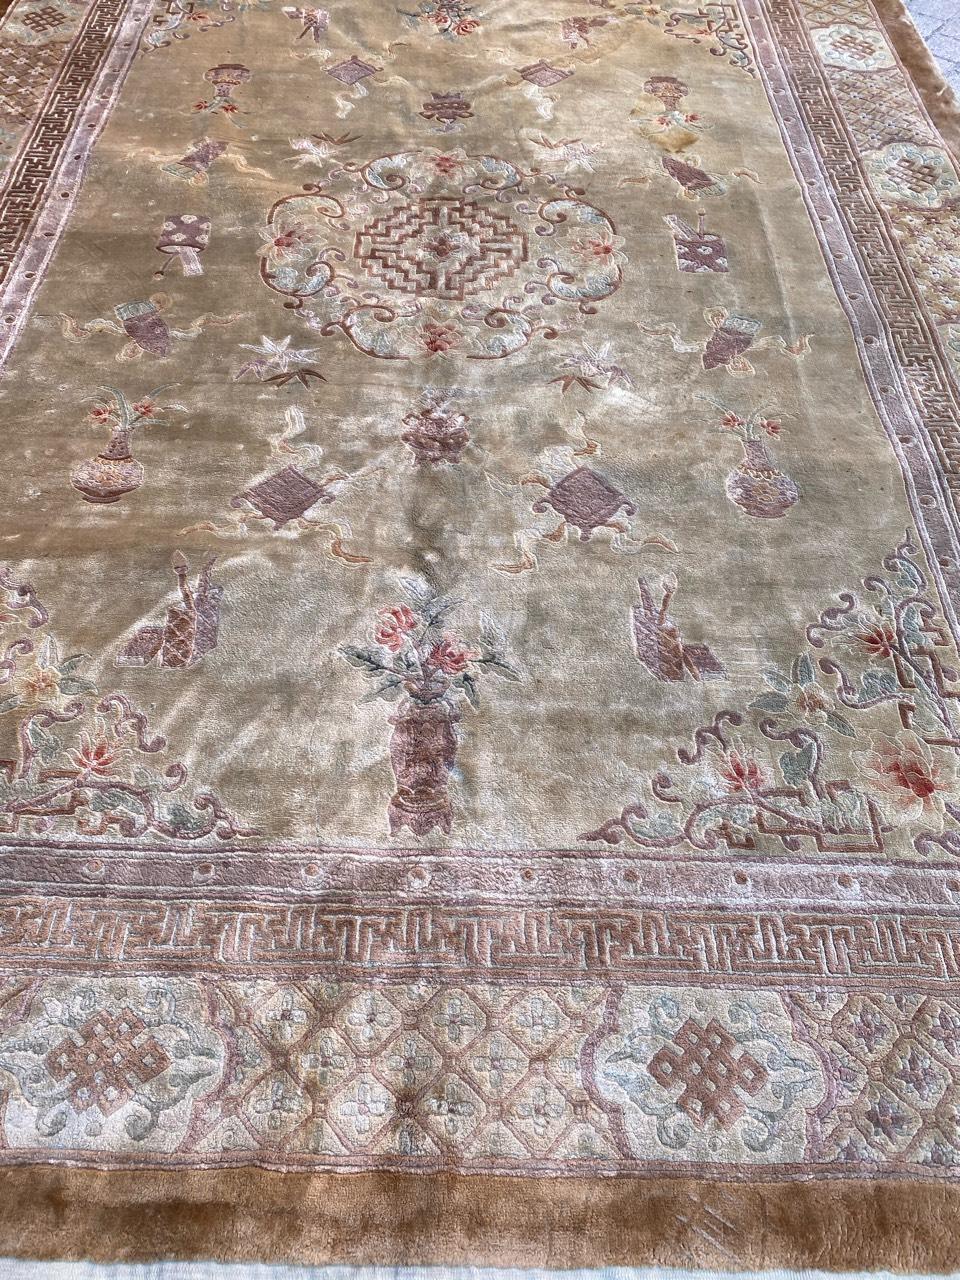 Very beautiful late 20th century Chinese silk rug with a Chinese design and light colors with brown, beige, green and pink, entirely and finely hand knotted with silk velvet on silk foundation.